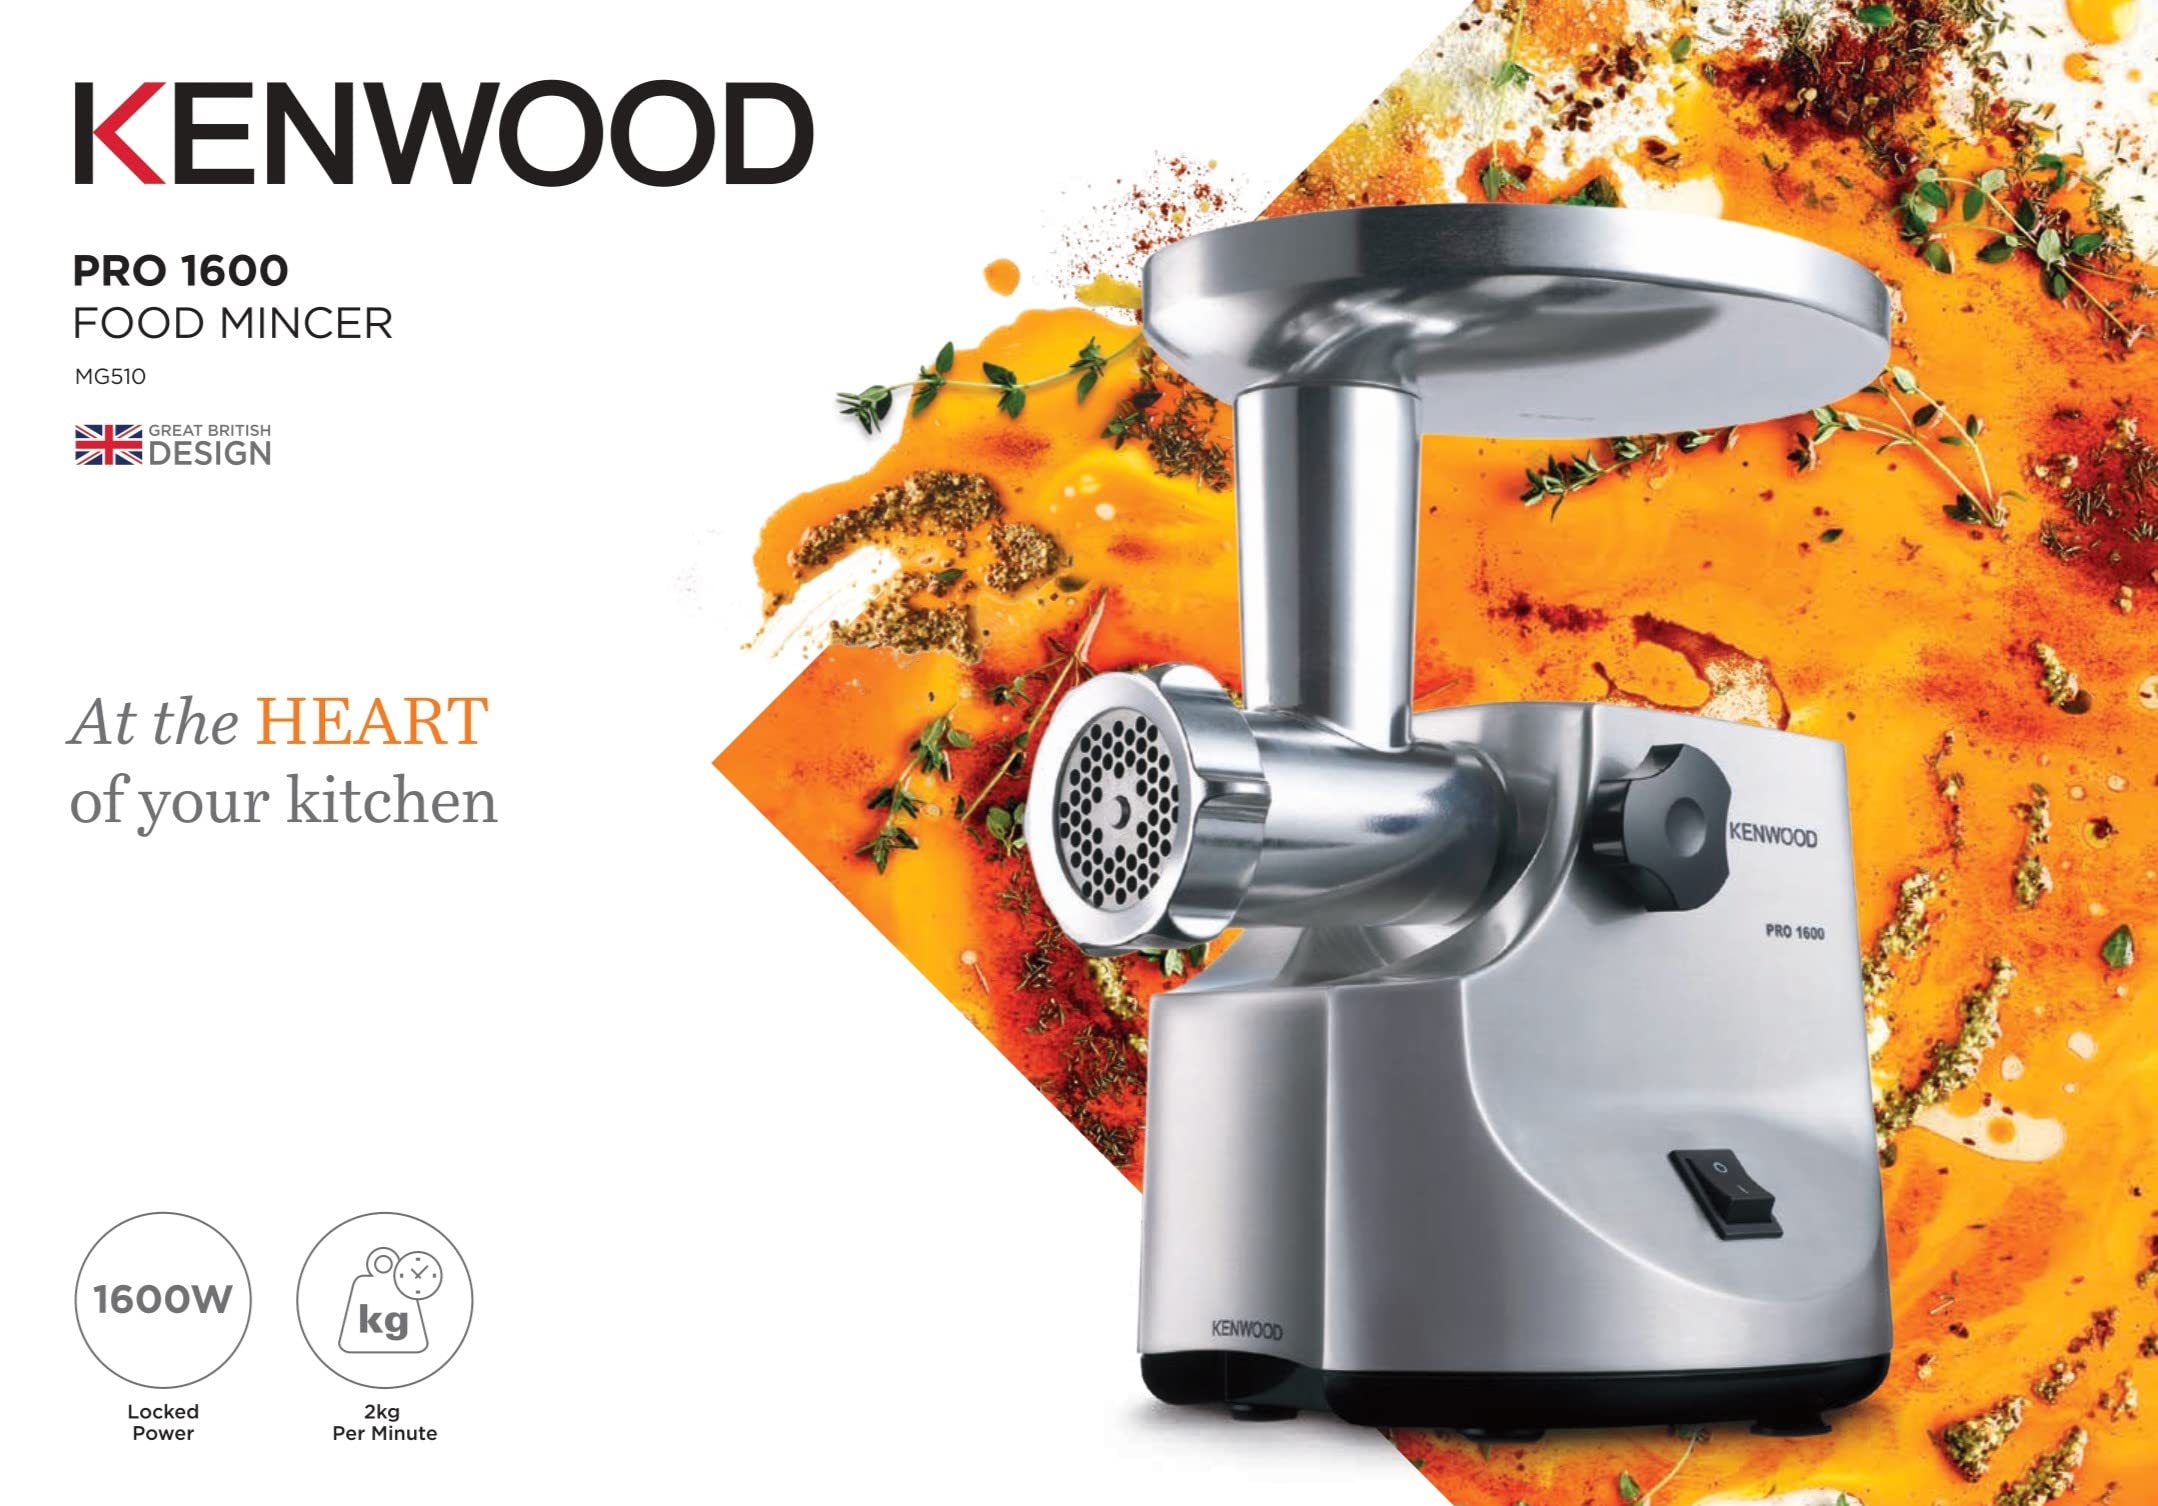 KENWOOD Meat Grinder 1600W Powerful Metal Body Meat Mincer with Kibbeh Maker, Sausage Maker, Feed Tube Pusher, 3 Stainless Steel Screens for Fine, Medium & Coarse Results MG510 Silver